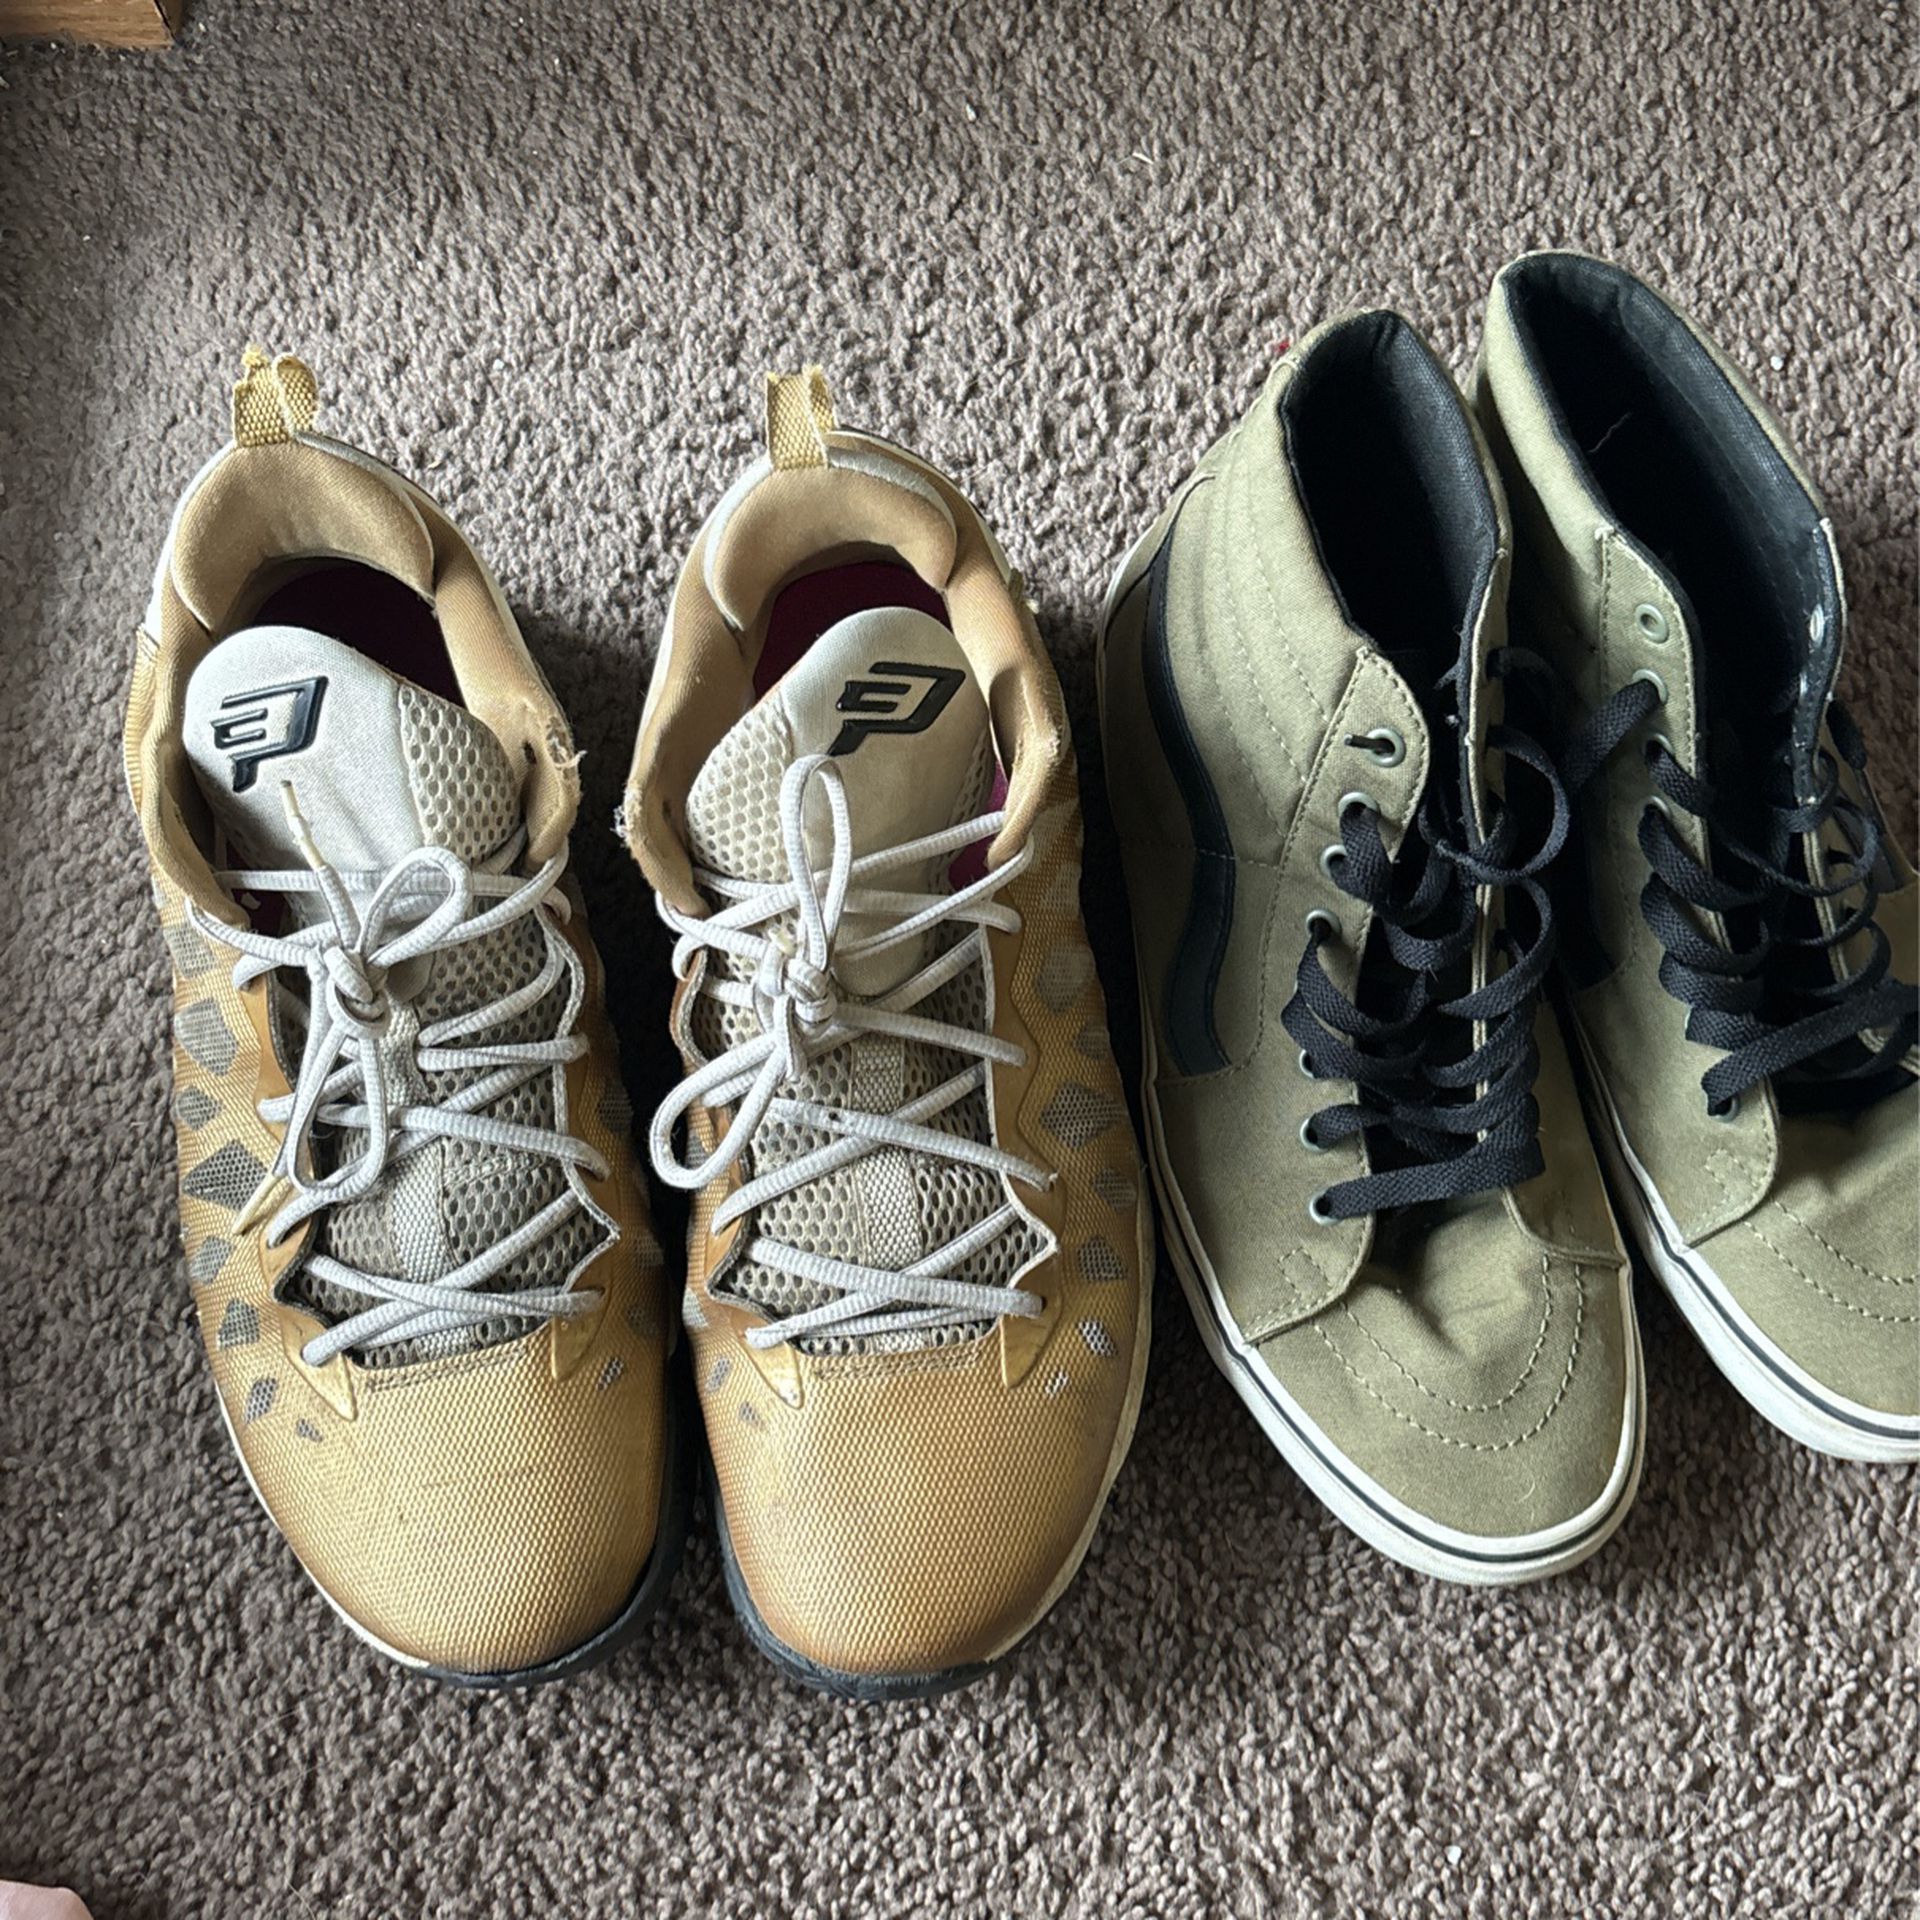 Jordan CP3s and Vans olive green and black